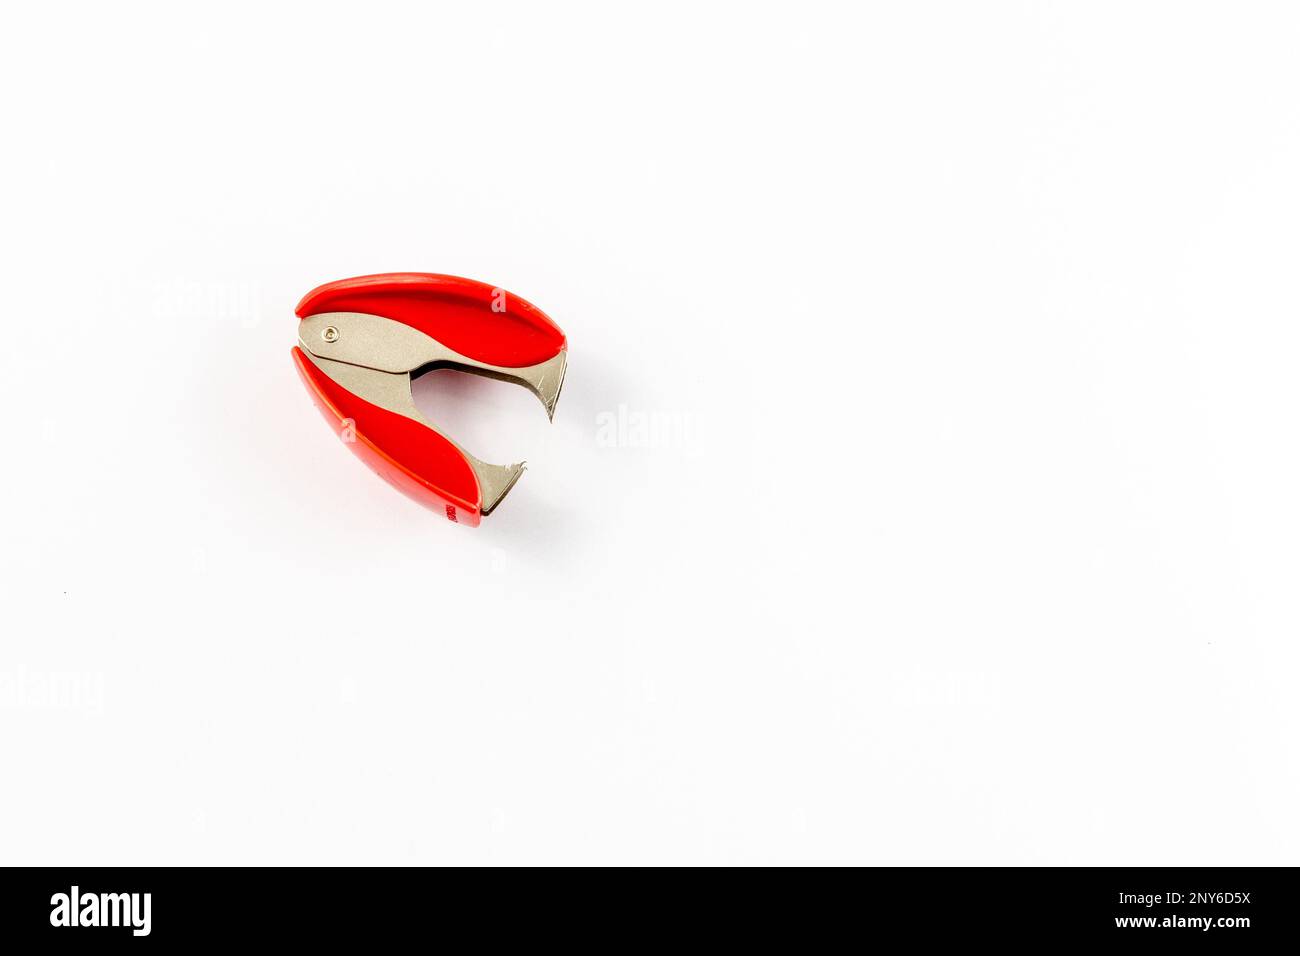 Staple remover on white background high angle view Stock Photo